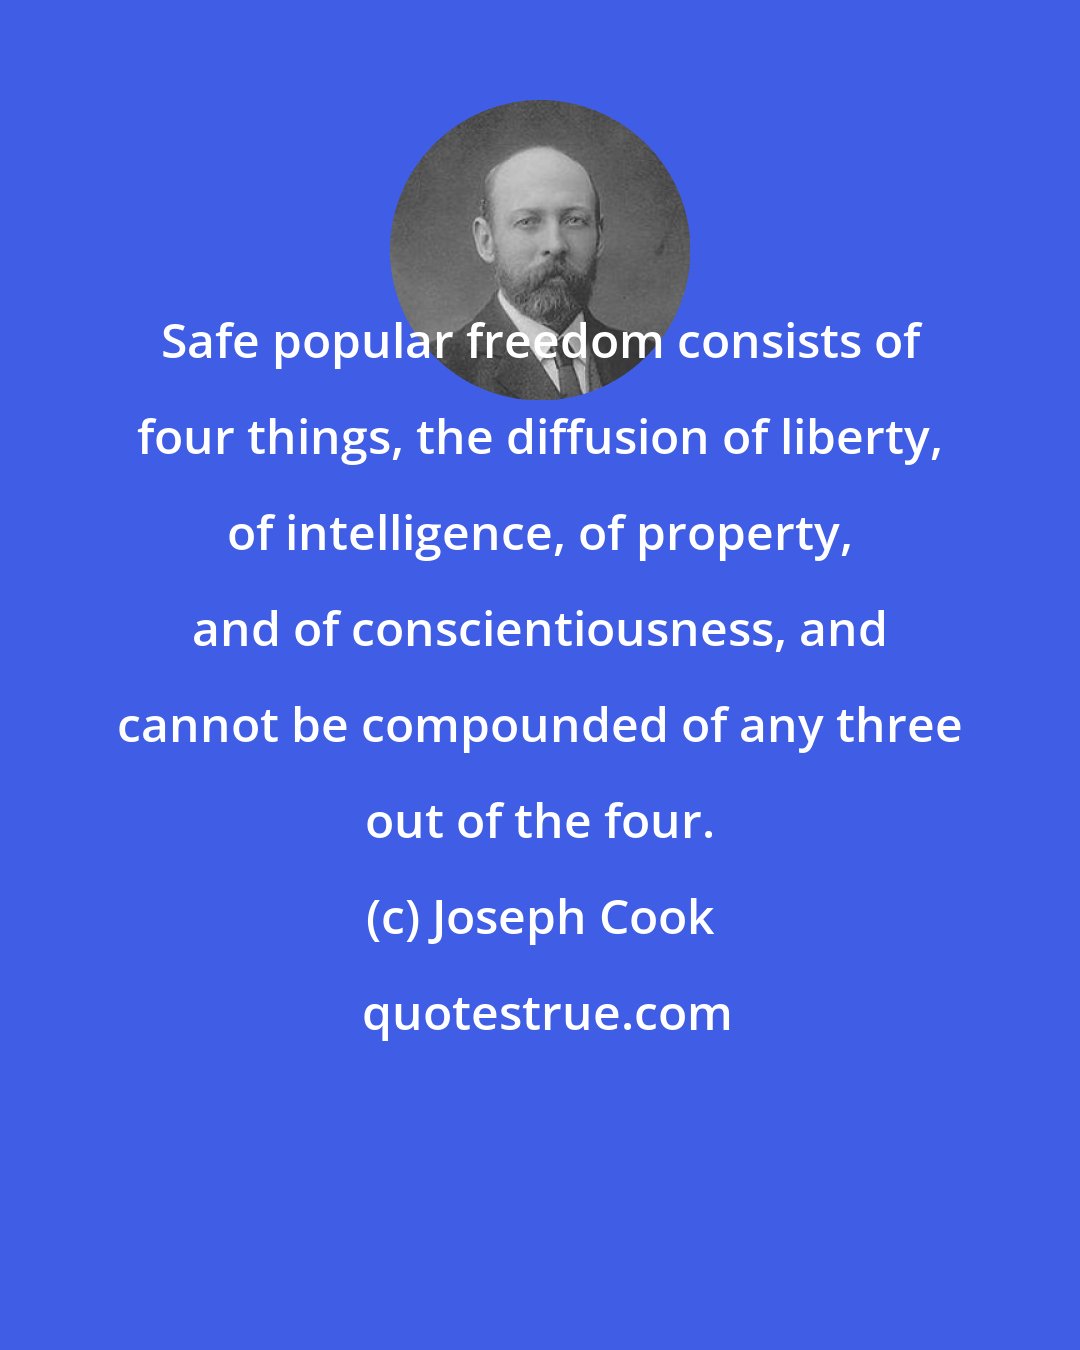 Joseph Cook: Safe popular freedom consists of four things, the diffusion of liberty, of intelligence, of property, and of conscientiousness, and cannot be compounded of any three out of the four.